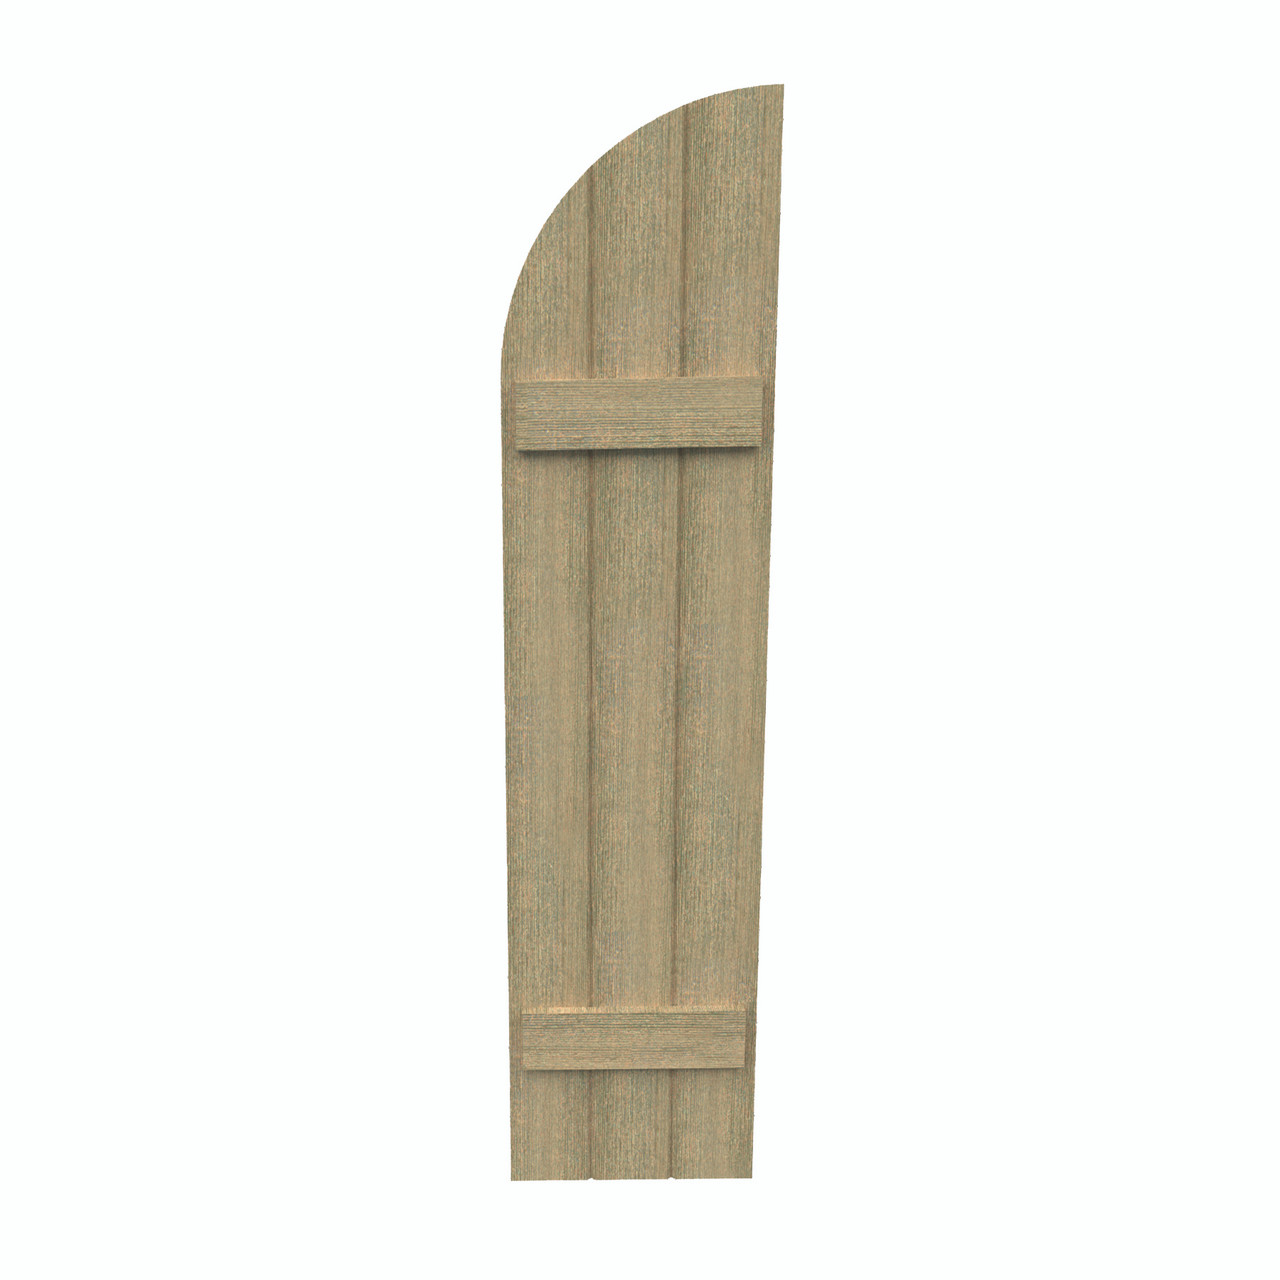 18 inch by 76 inch Quarter Round Shutter with 3-Boards